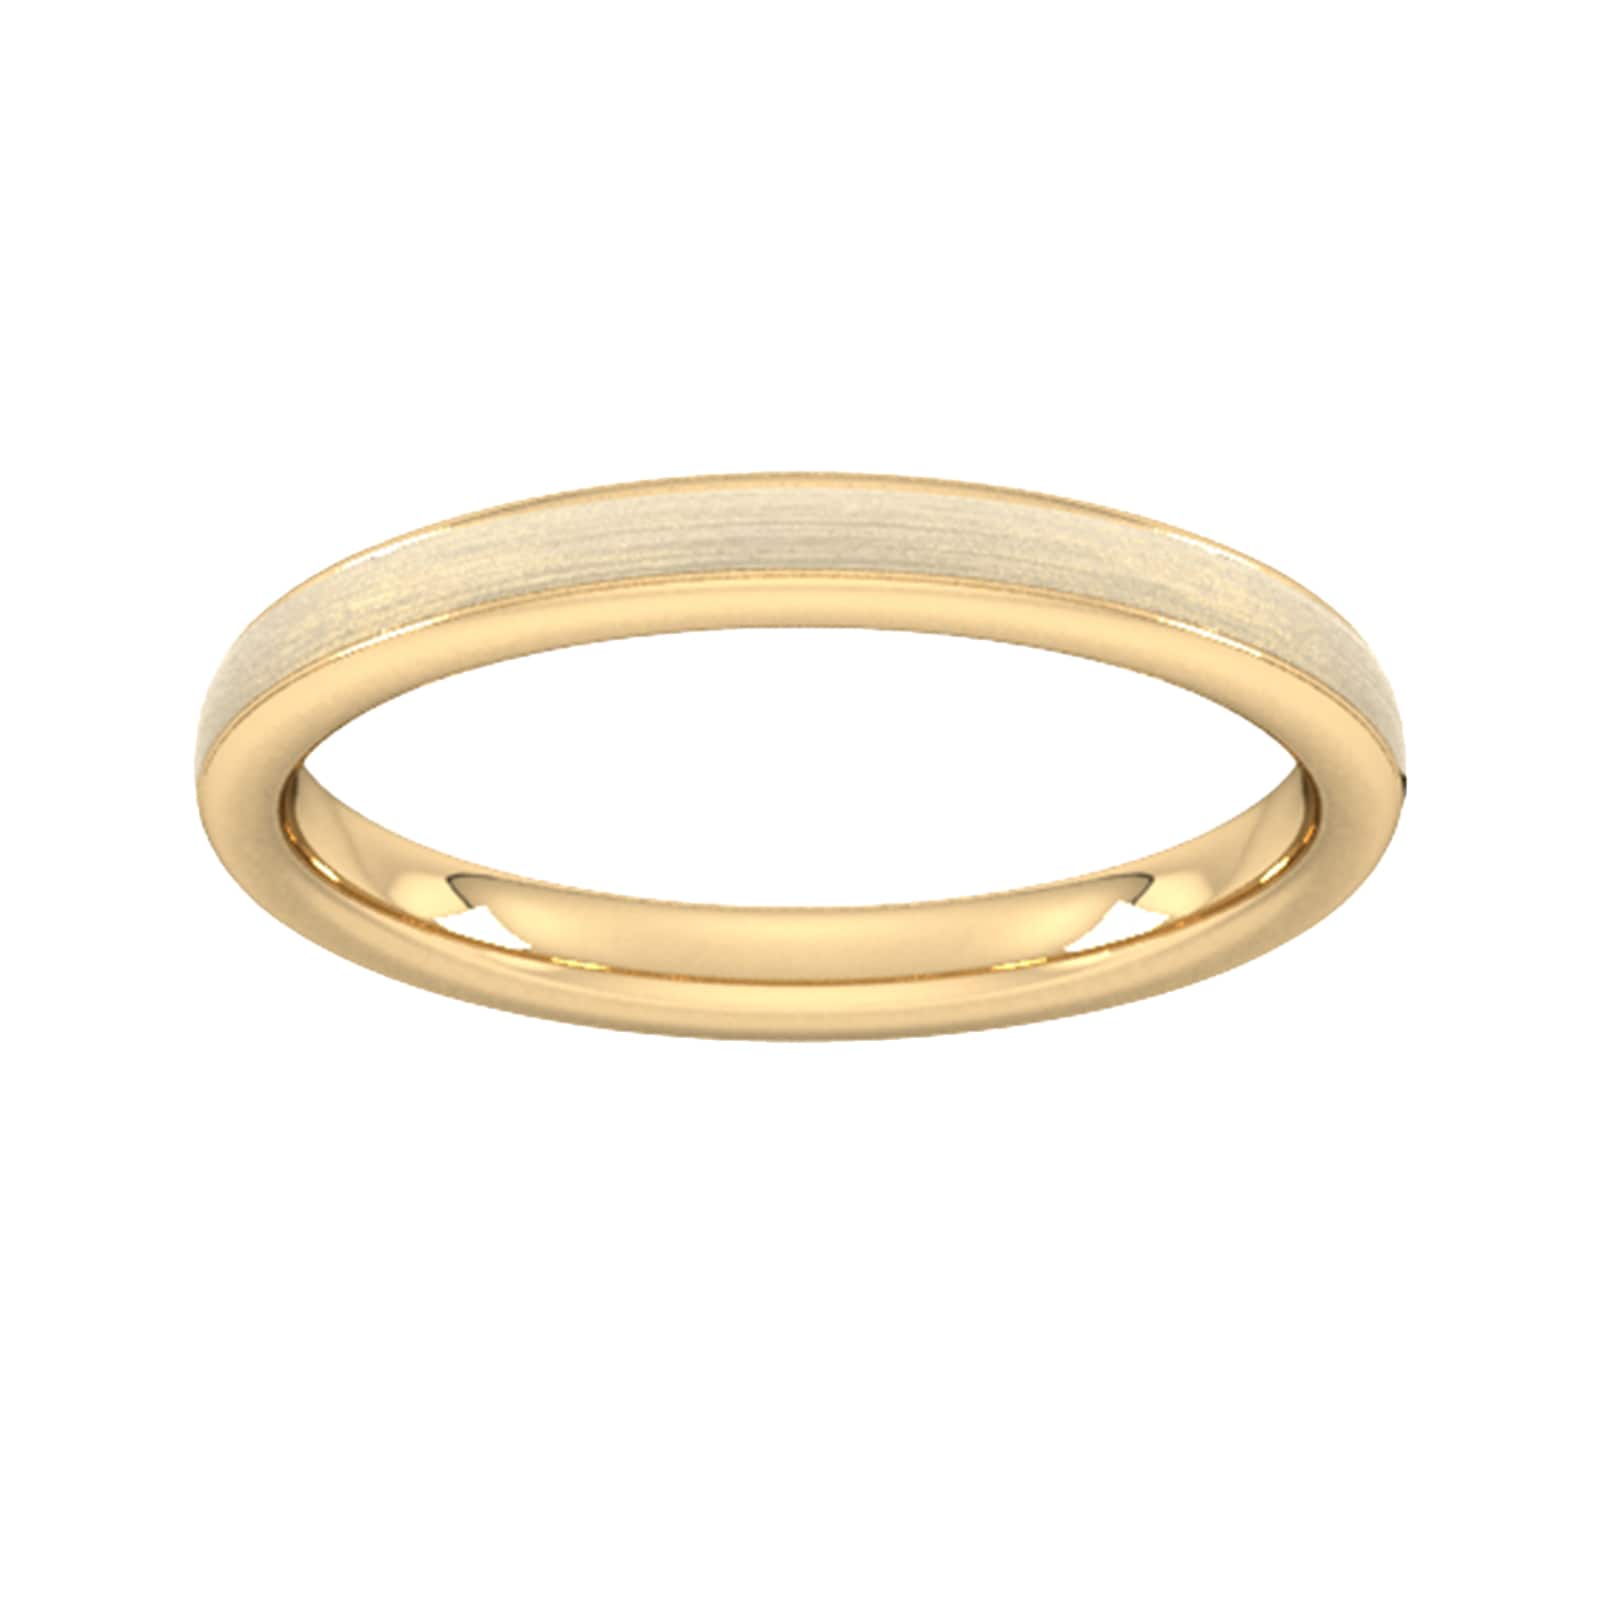 2.5mm D Shape Standard Matt Centre With Grooves Wedding Ring In 18 Carat Yellow Gold - Ring Size O